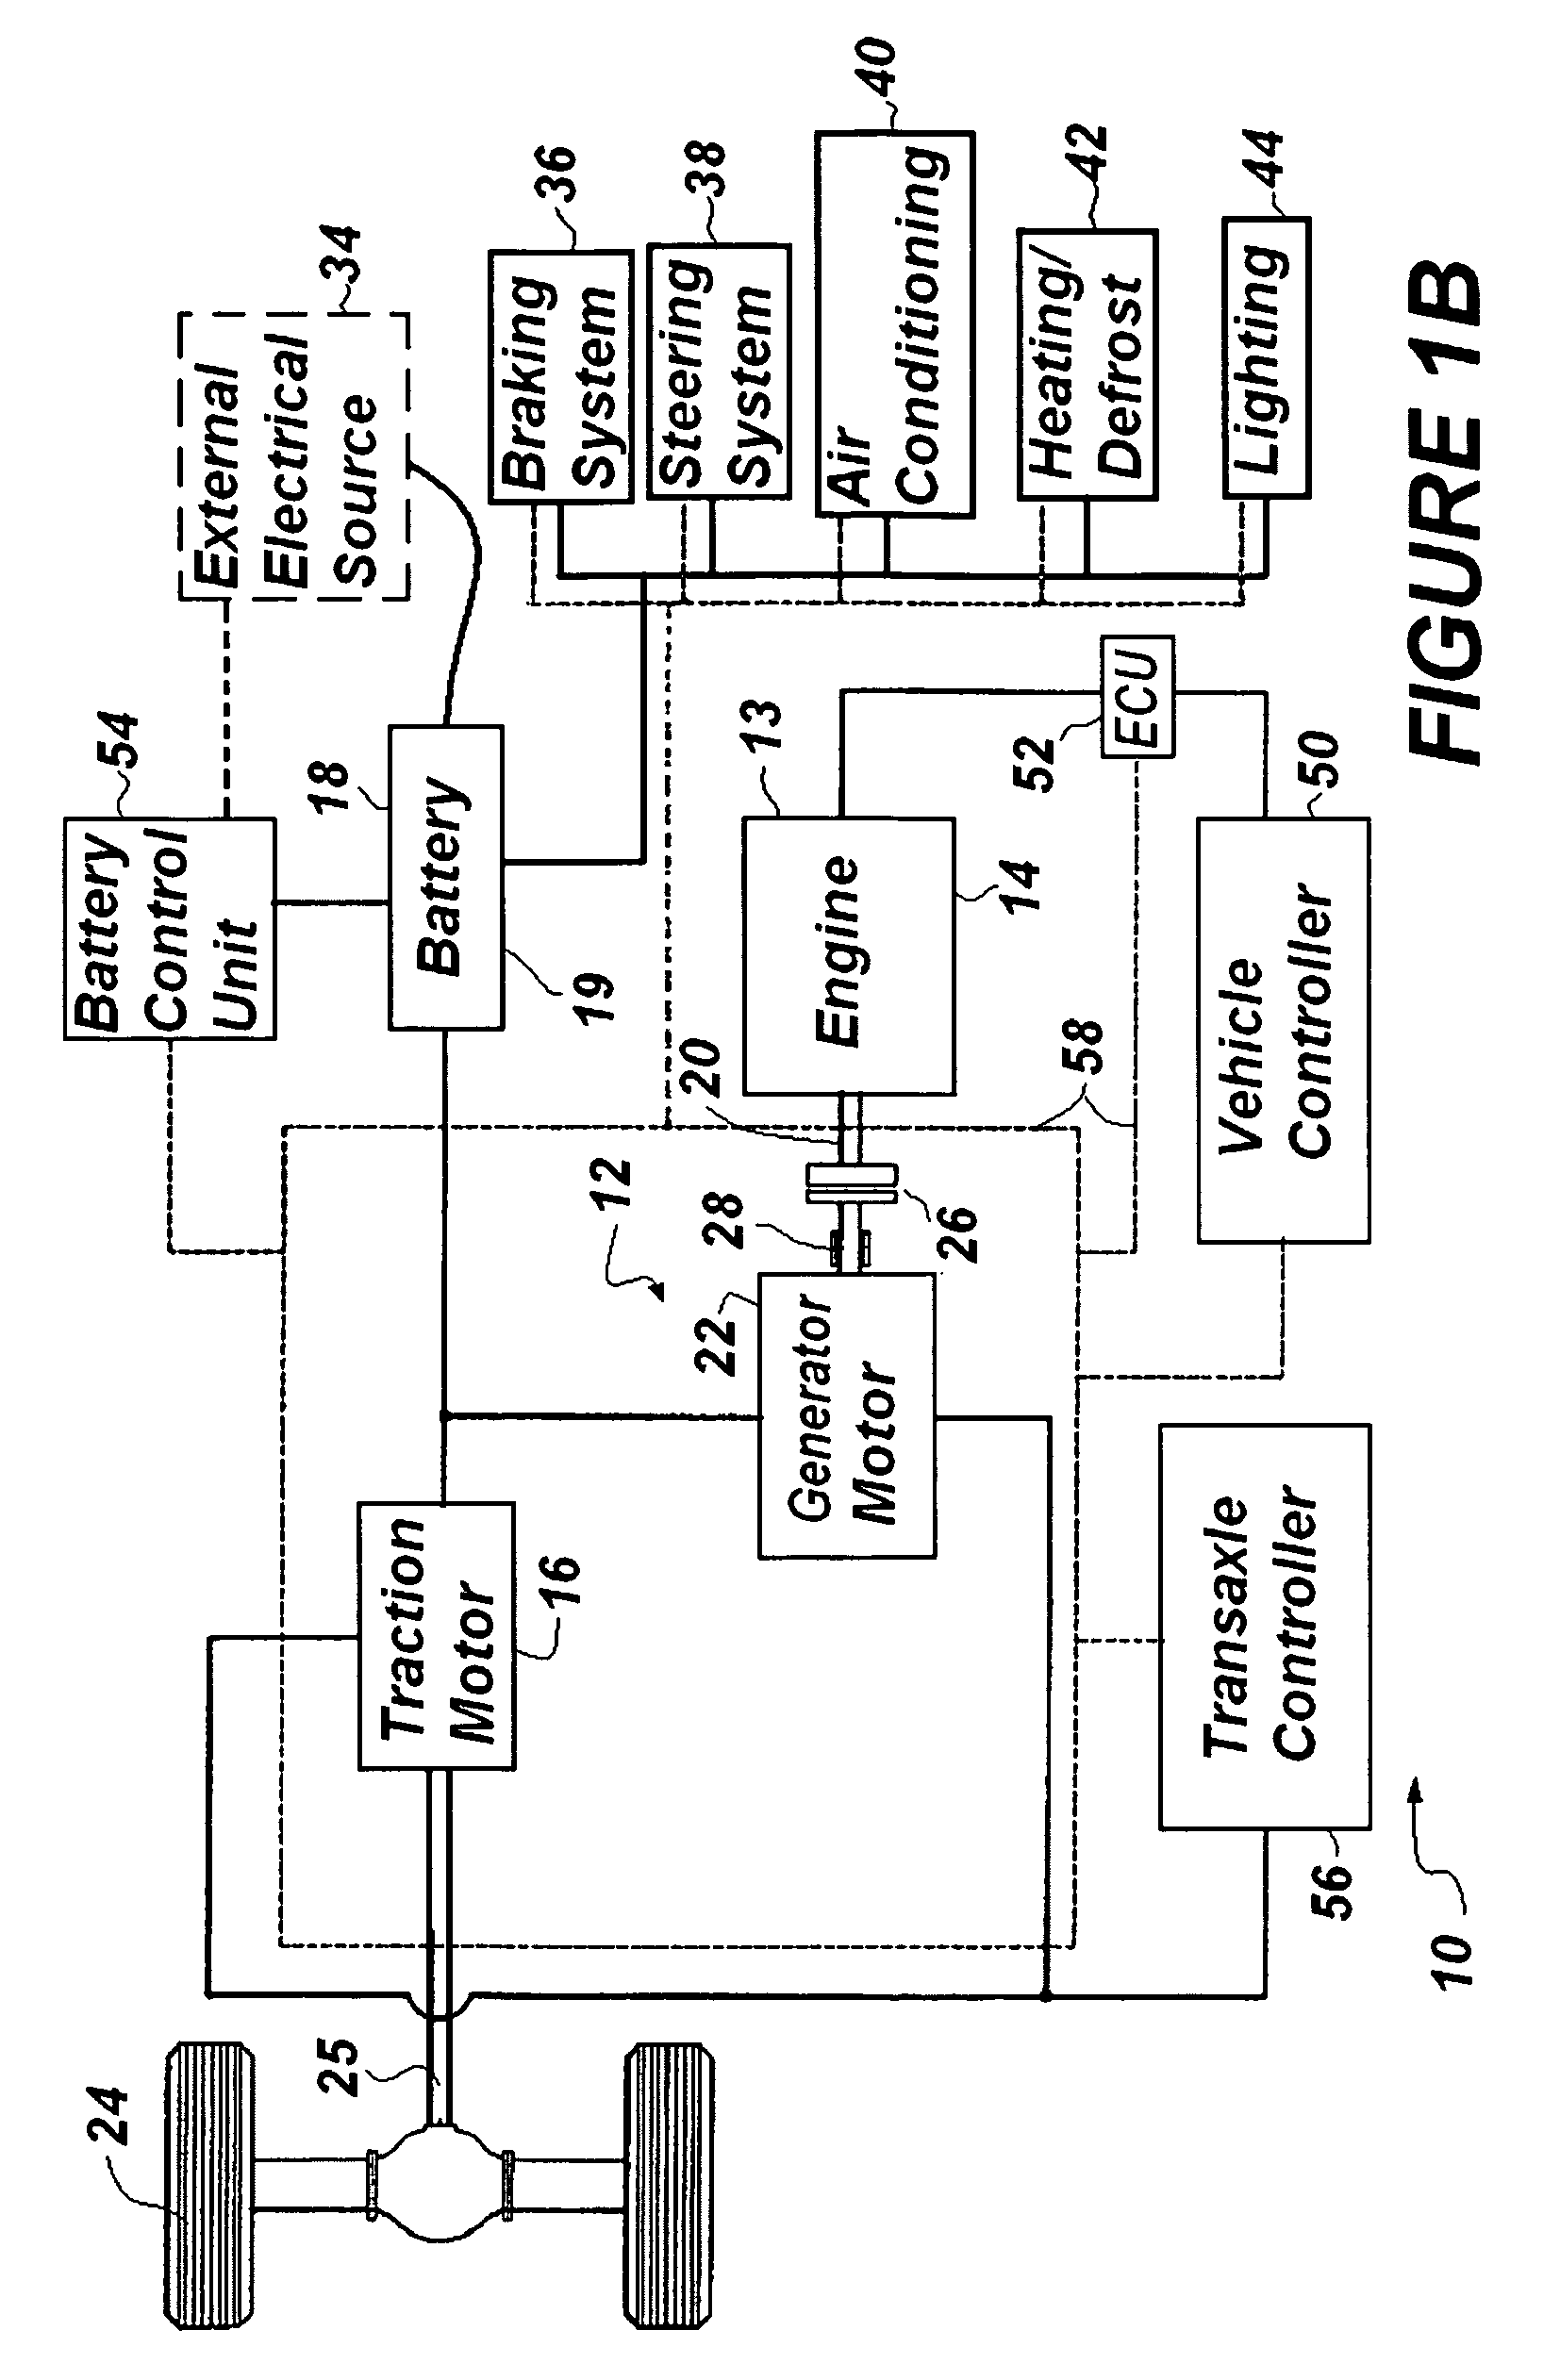 Self-learning control system for plug-in hybrid vehicles